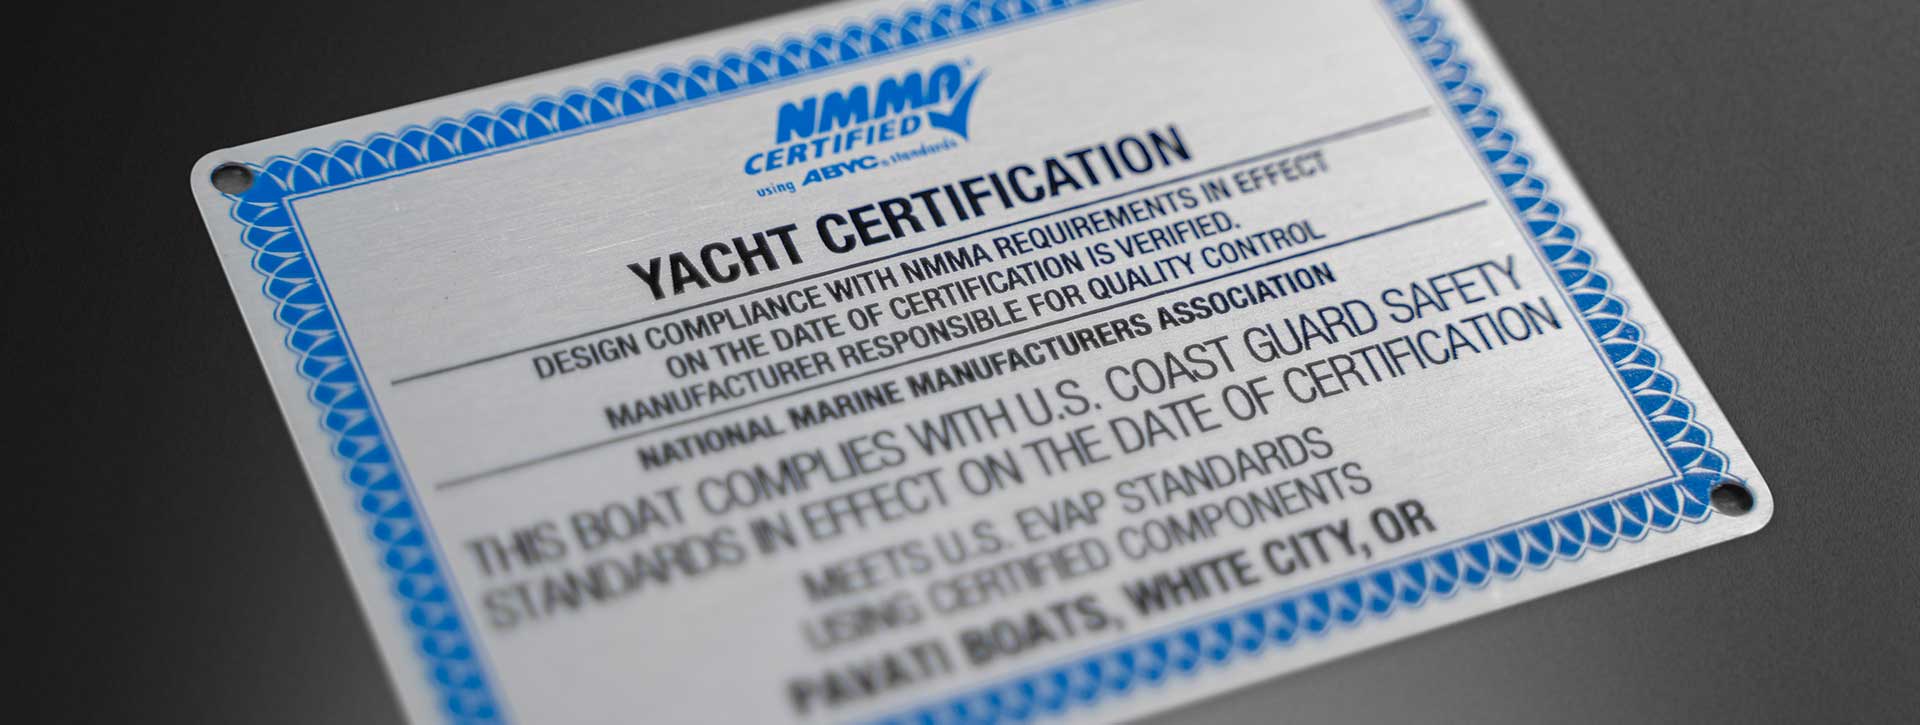 yacht certification course cost